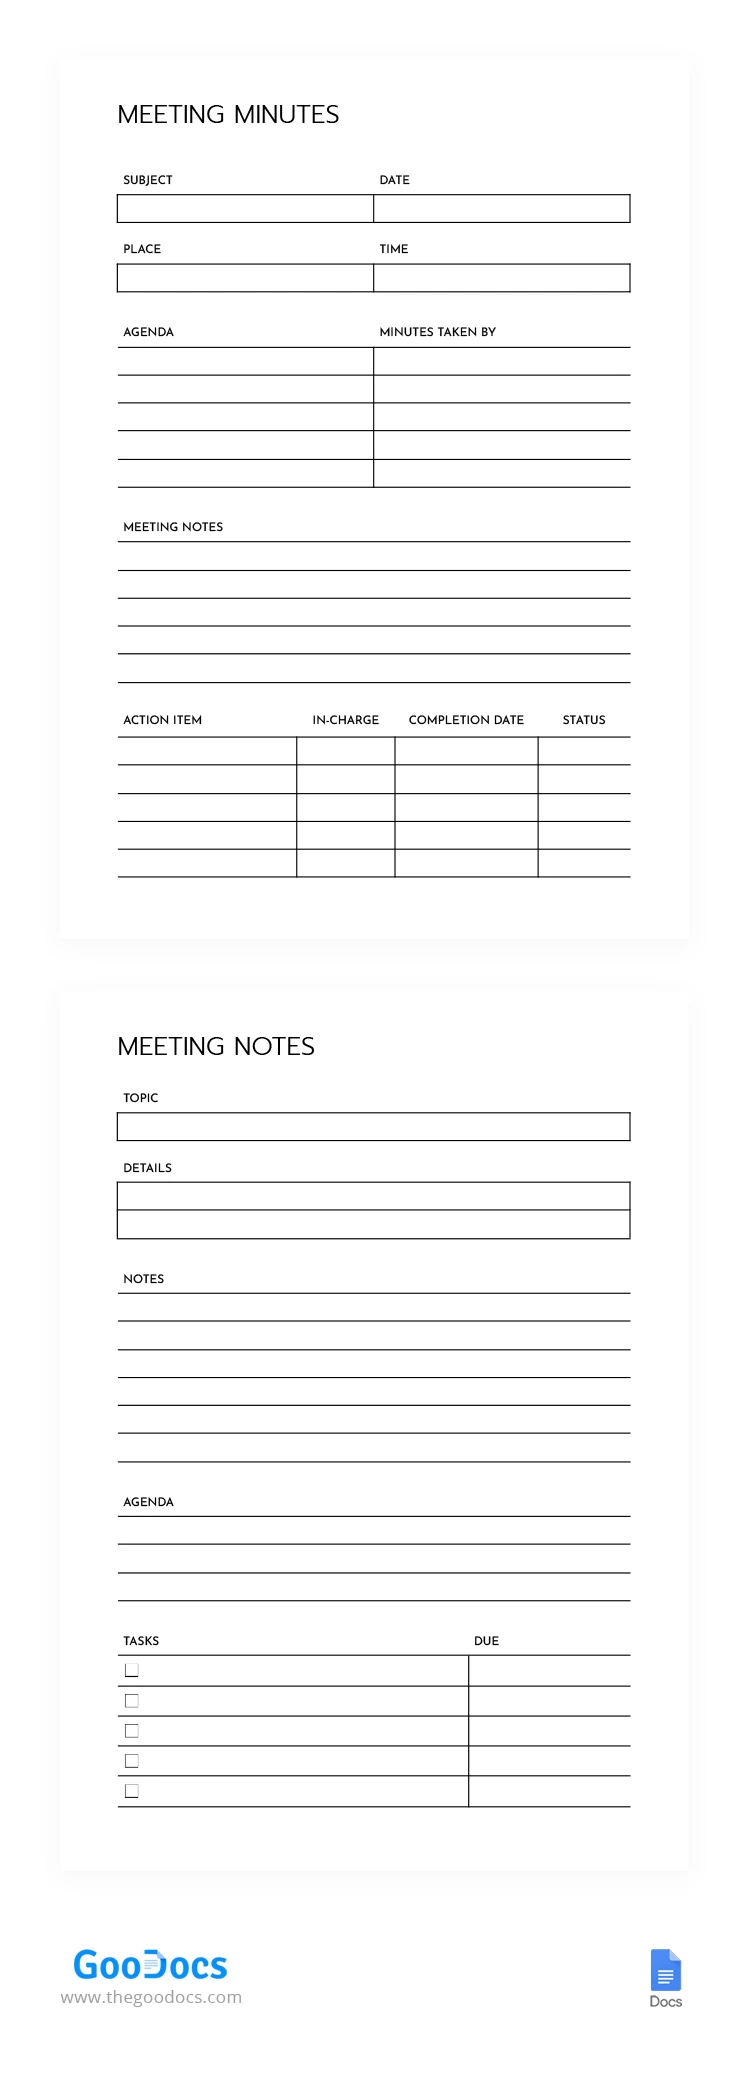 Simple Meeting Minutes Note - free Google Docs Template - 10068569